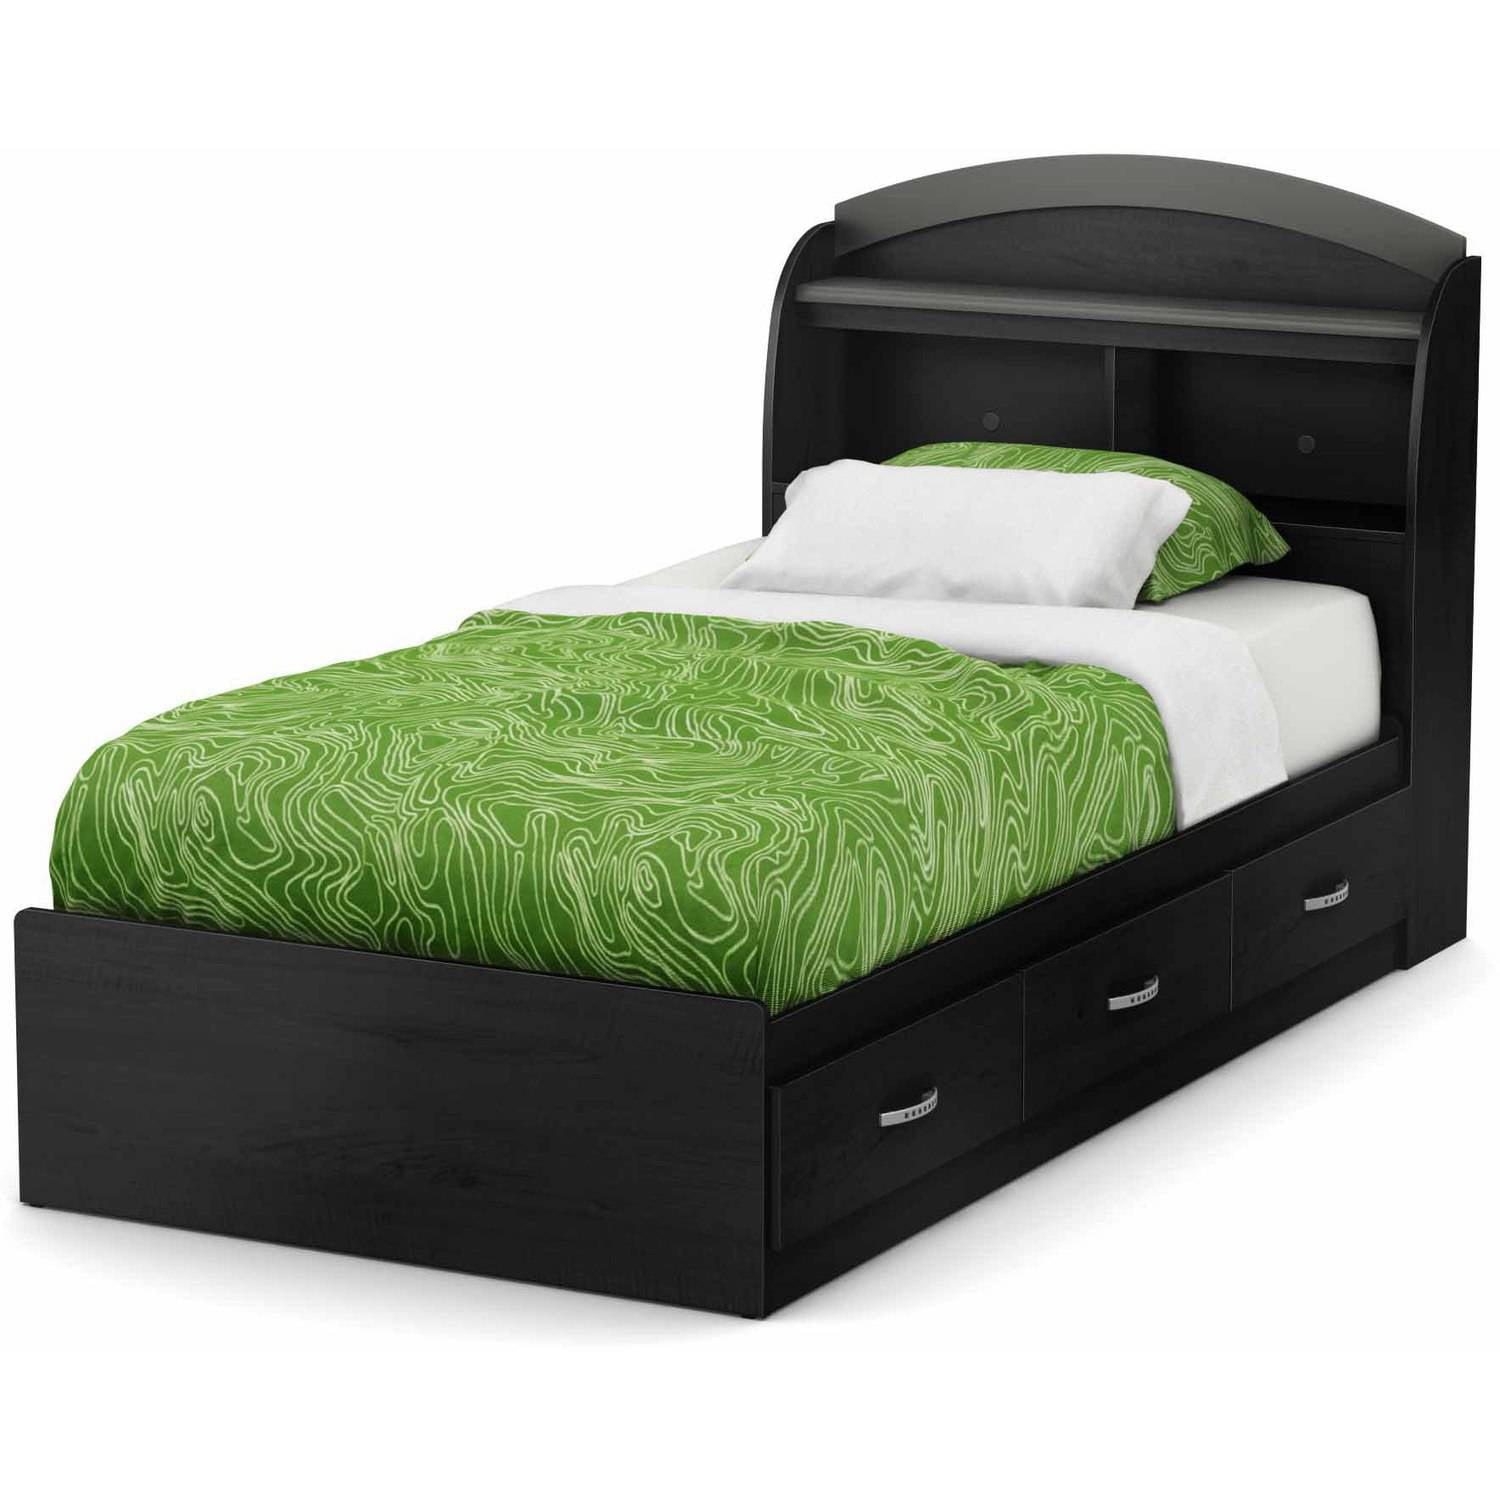 Details About South Shore Lazer 39 Inches Twin Mates Bed Black Onyx Kids Bedroom Furniture New